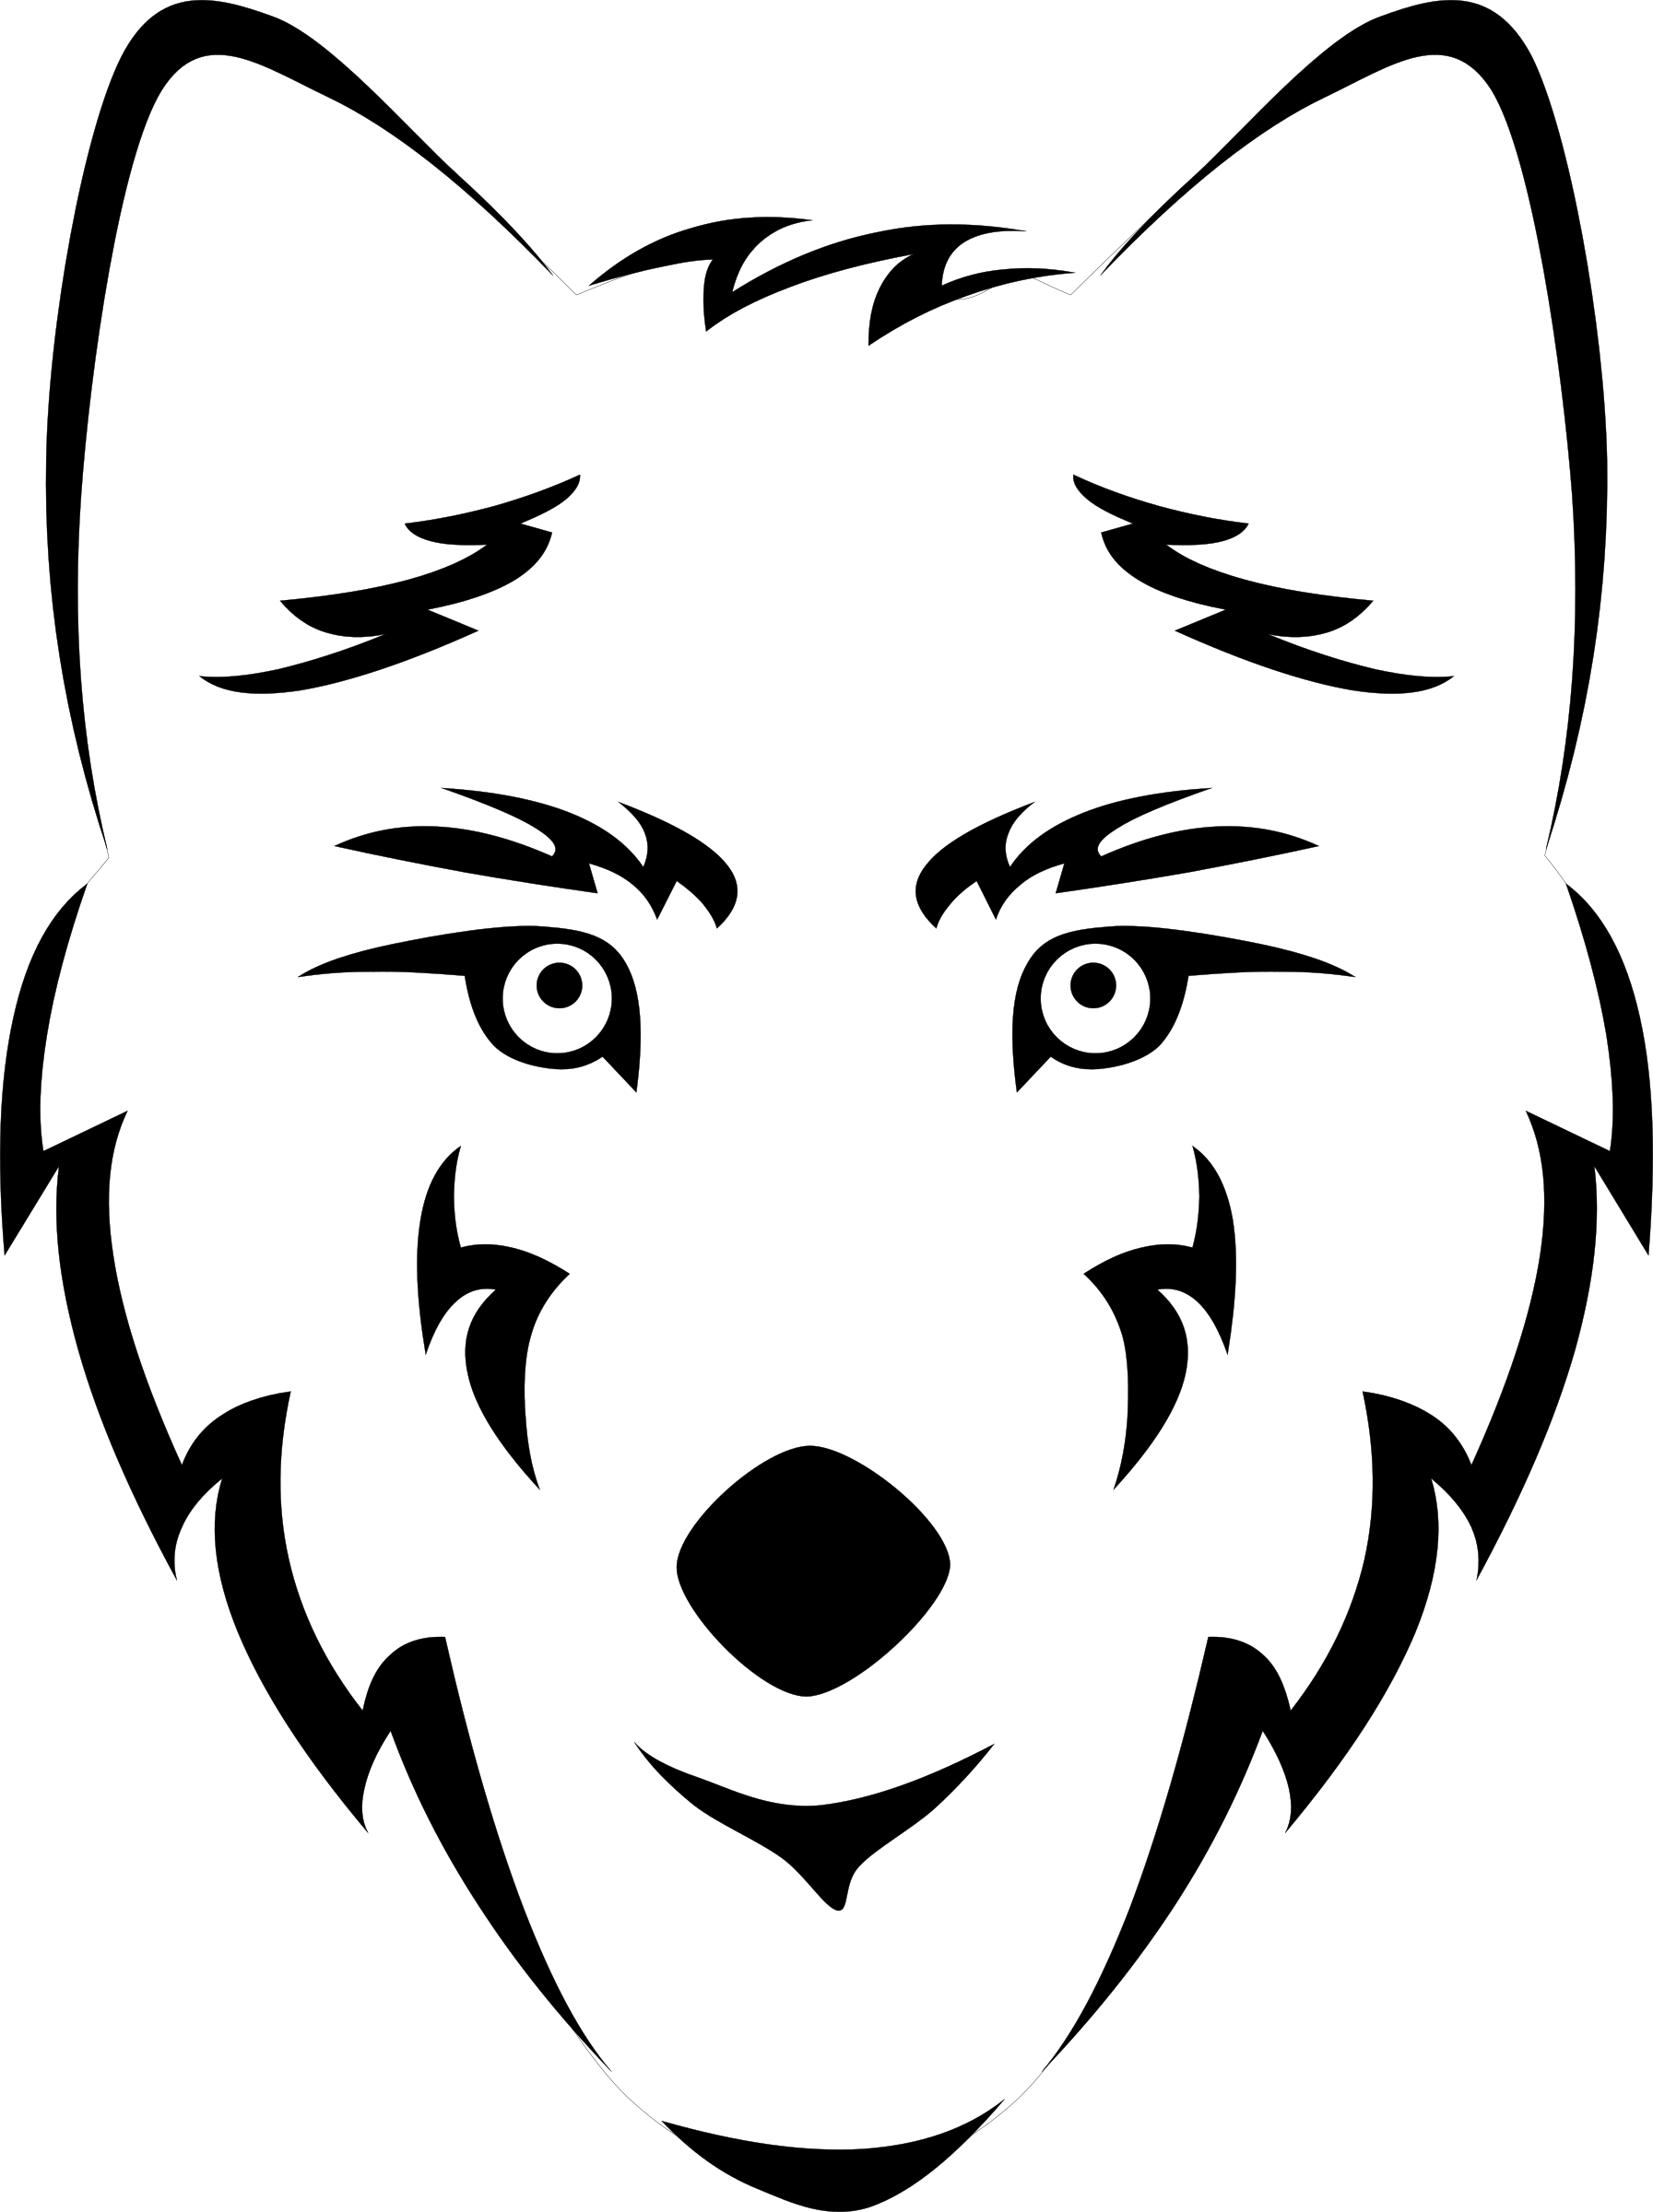 Download Svg Royalty Free Stock Blank Stylized Big Image Png Wolf Clip Art Png Image With No Background Pngkey Com